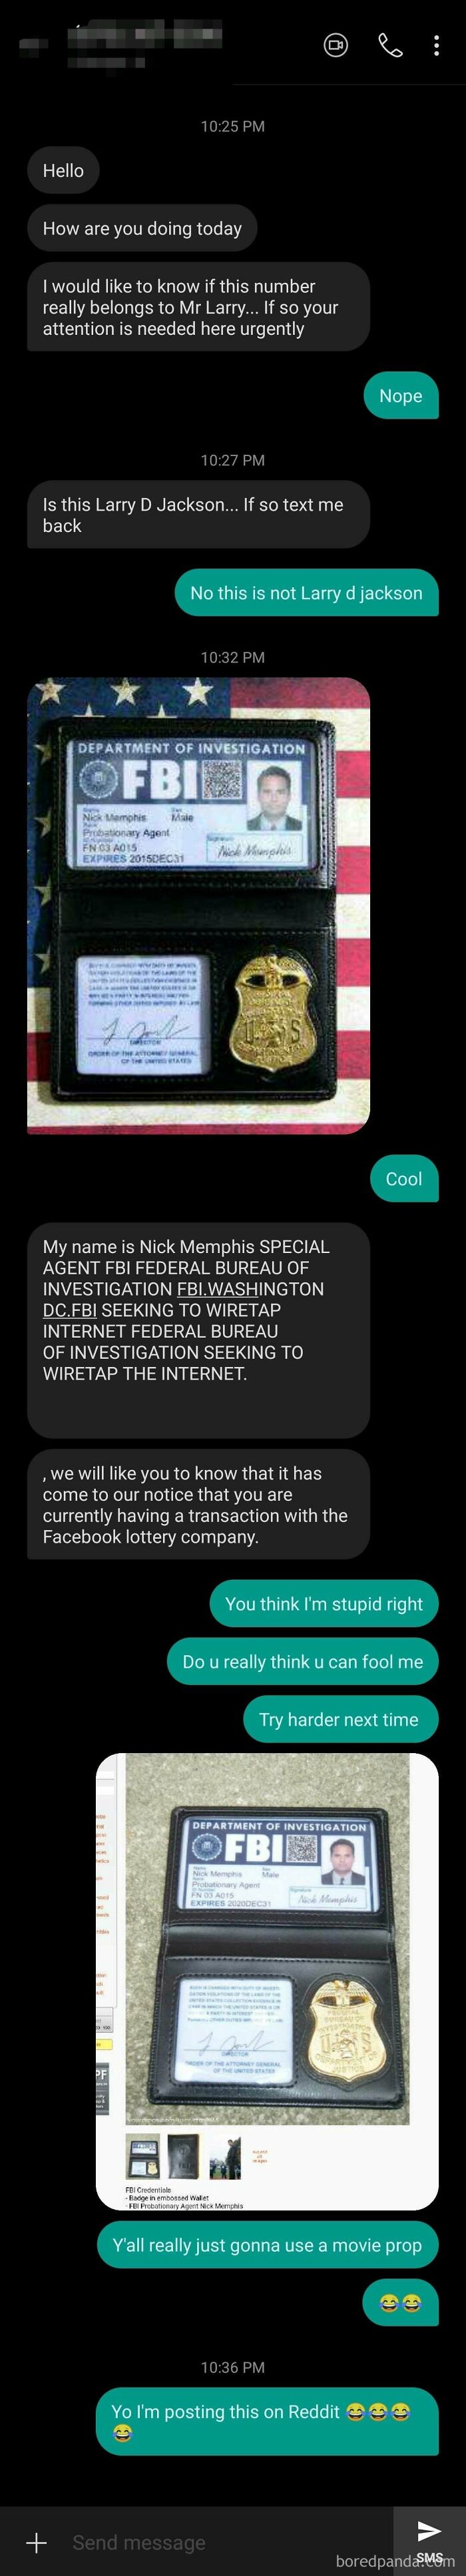 Some Number Texted Me, Said He Was An FBI Agent, And He Sent Me A Picture Of His Id. I Image Searched The Pic If His Id, And Turns Out It Was Photoshopped Version Of A Movie Prop, The Guy On His Id Picture Is Michael Peña. He Didn't Even Try Hahahhah